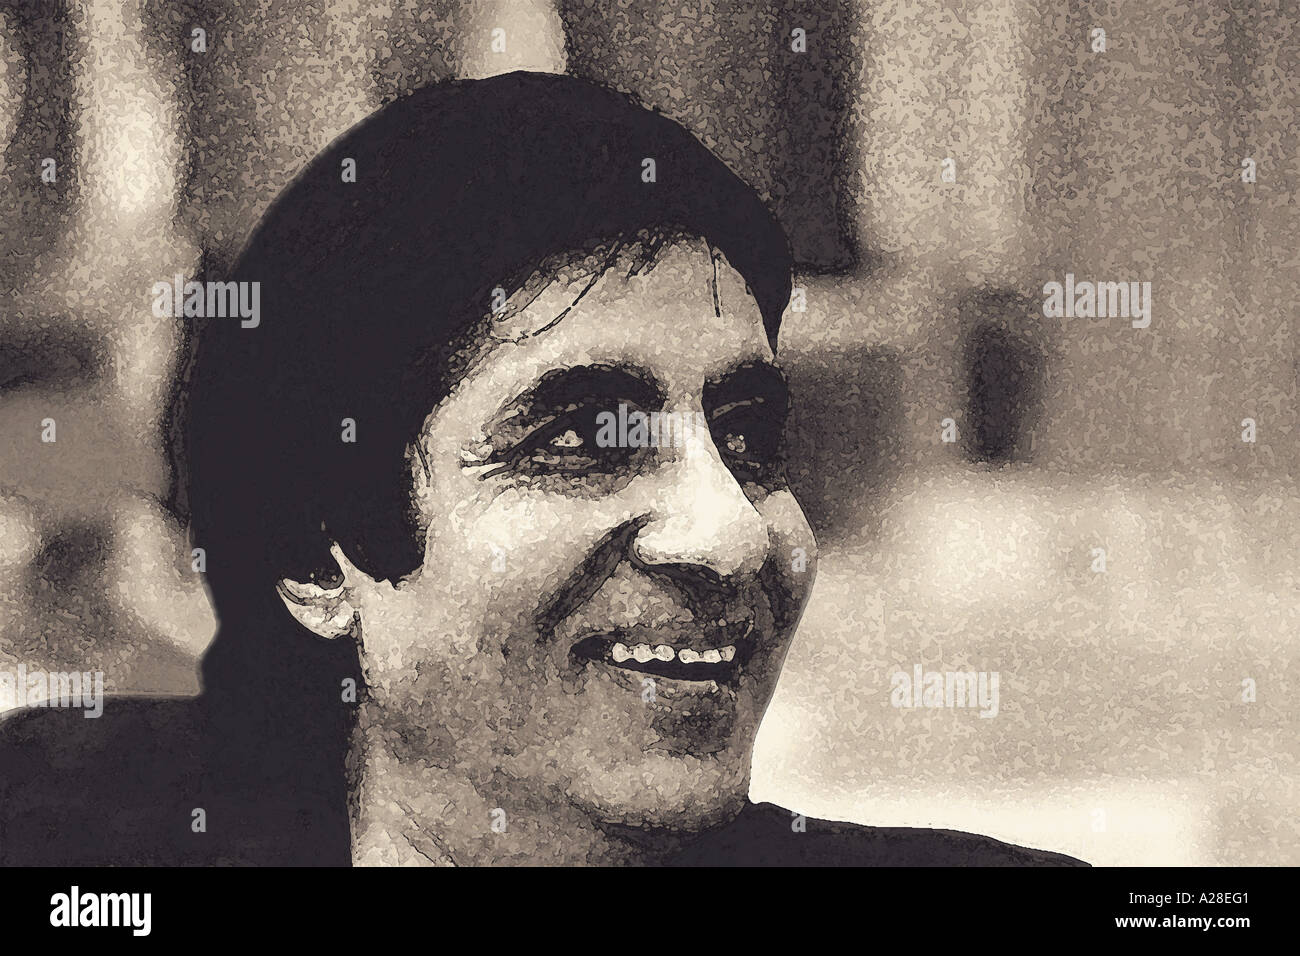 Indian Bollywood Film Star Actor Portrait of Amitabh Bachchan smiling India Stock Photo